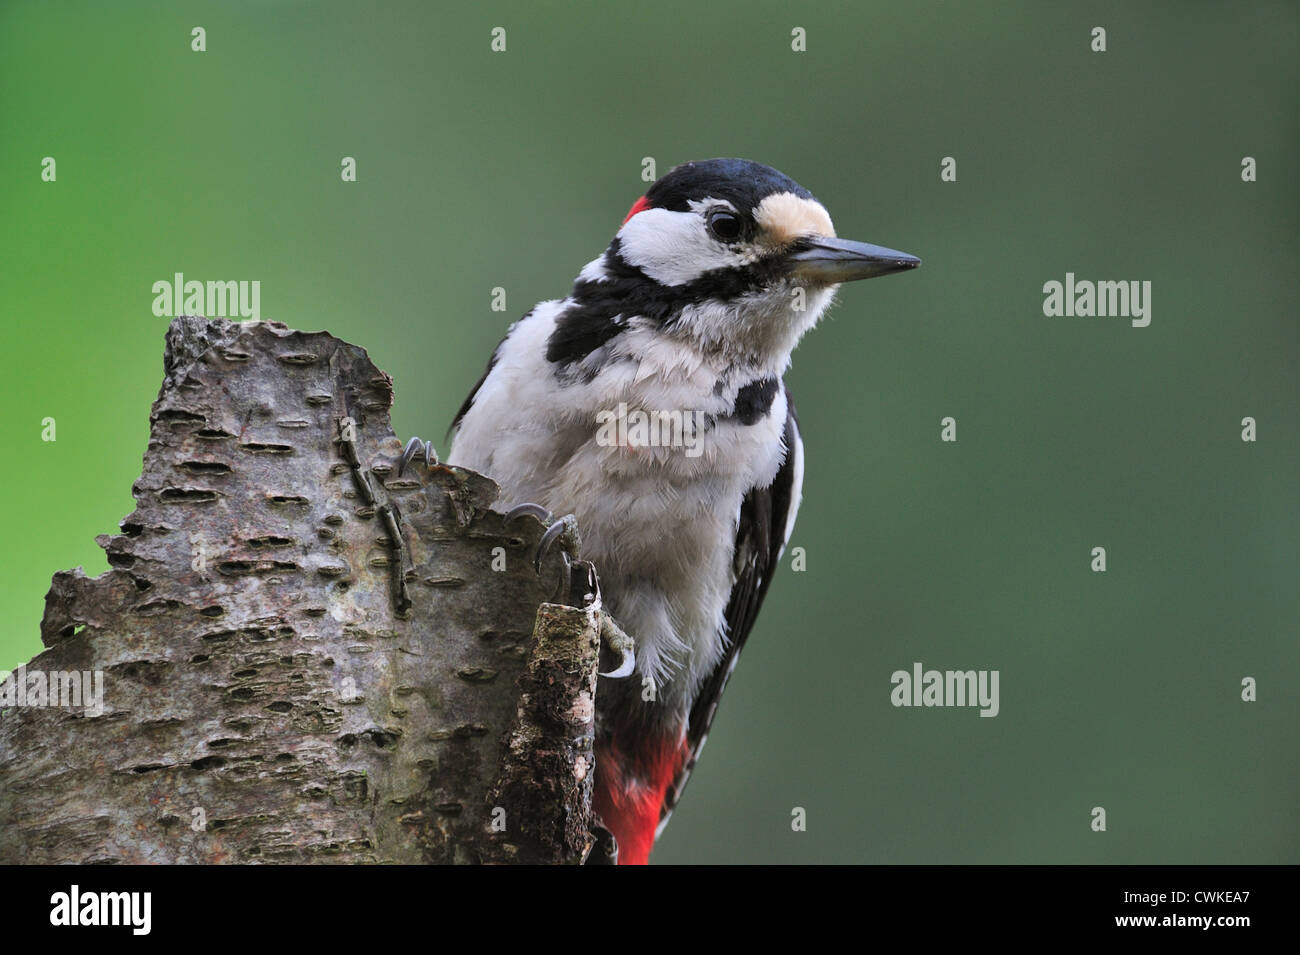 Great Spotted Woodpecker / Greater Spotted Woodpecker (Dendrocopos major) male on tree trunk in forest, Belgium Stock Photo